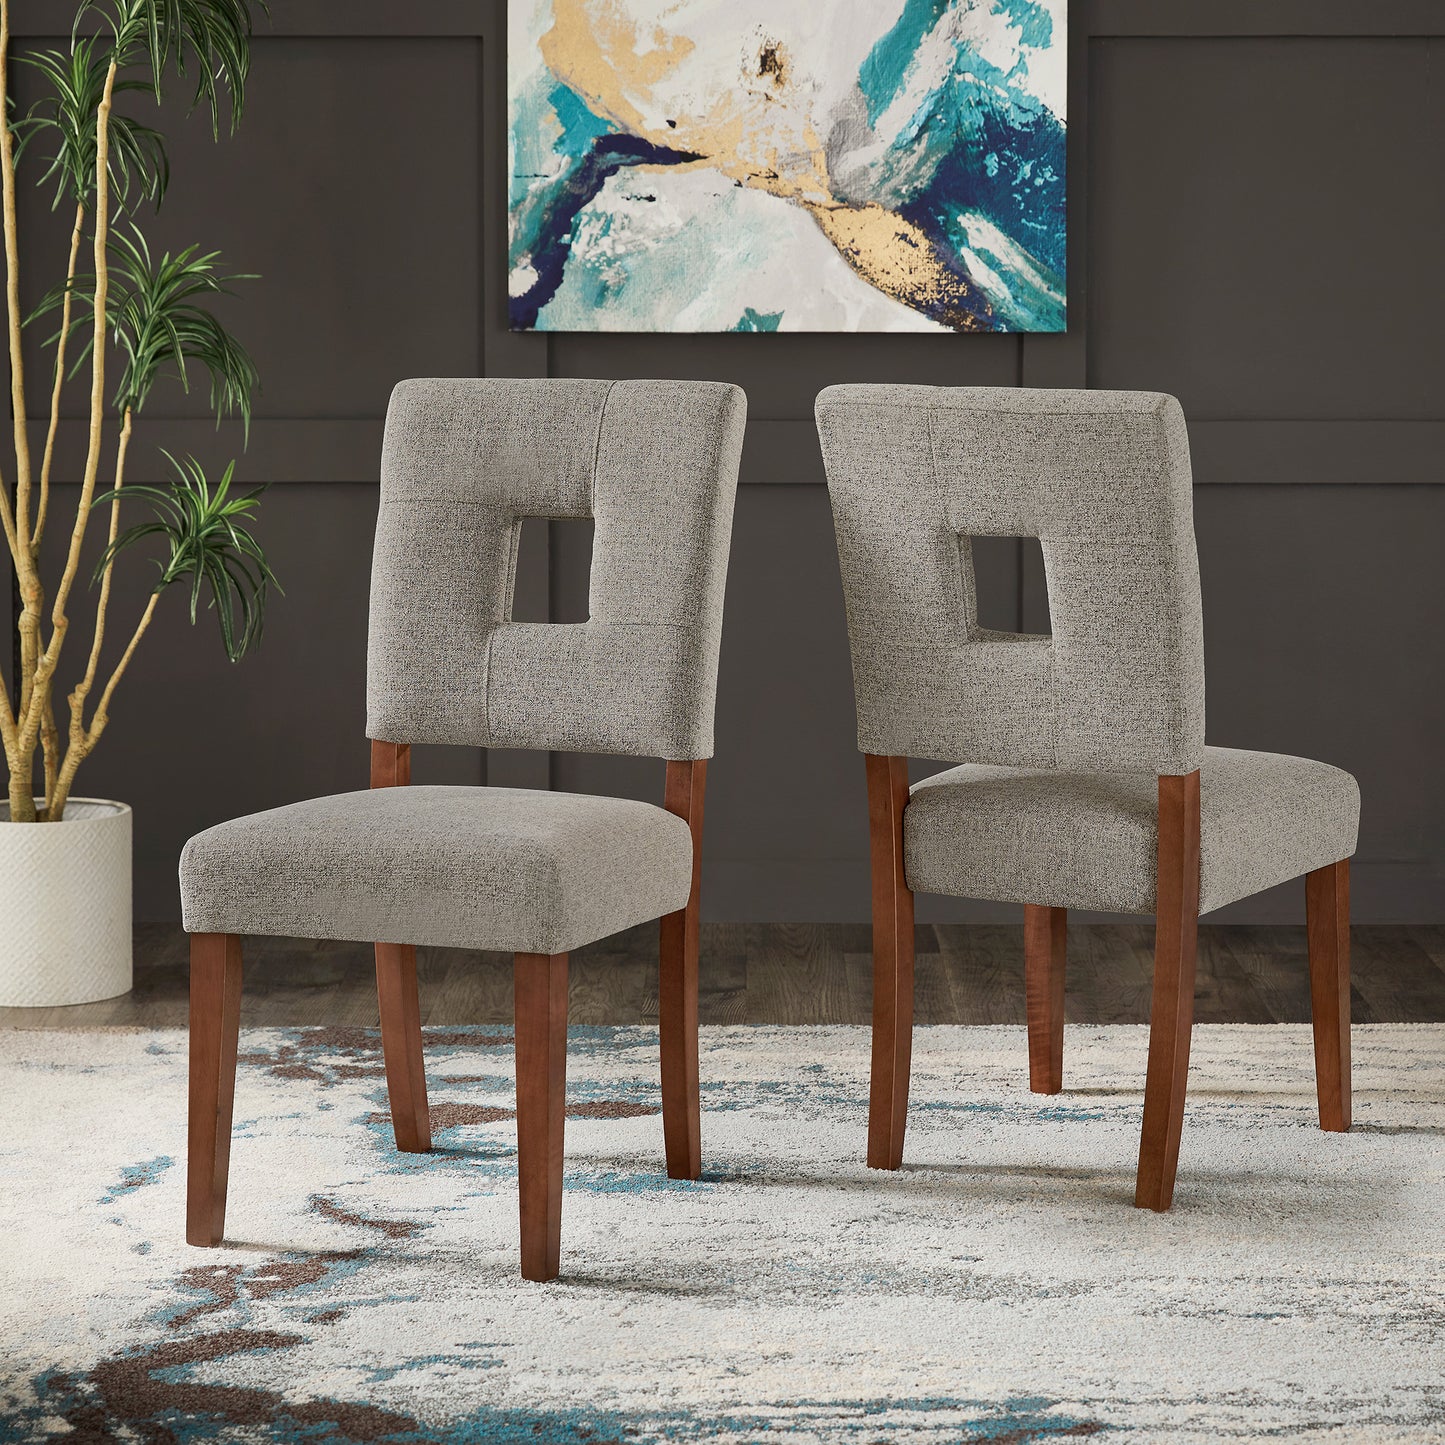 Upholstered Fabric Keyhole Dining Chairs (Set of 2) - Light Grey